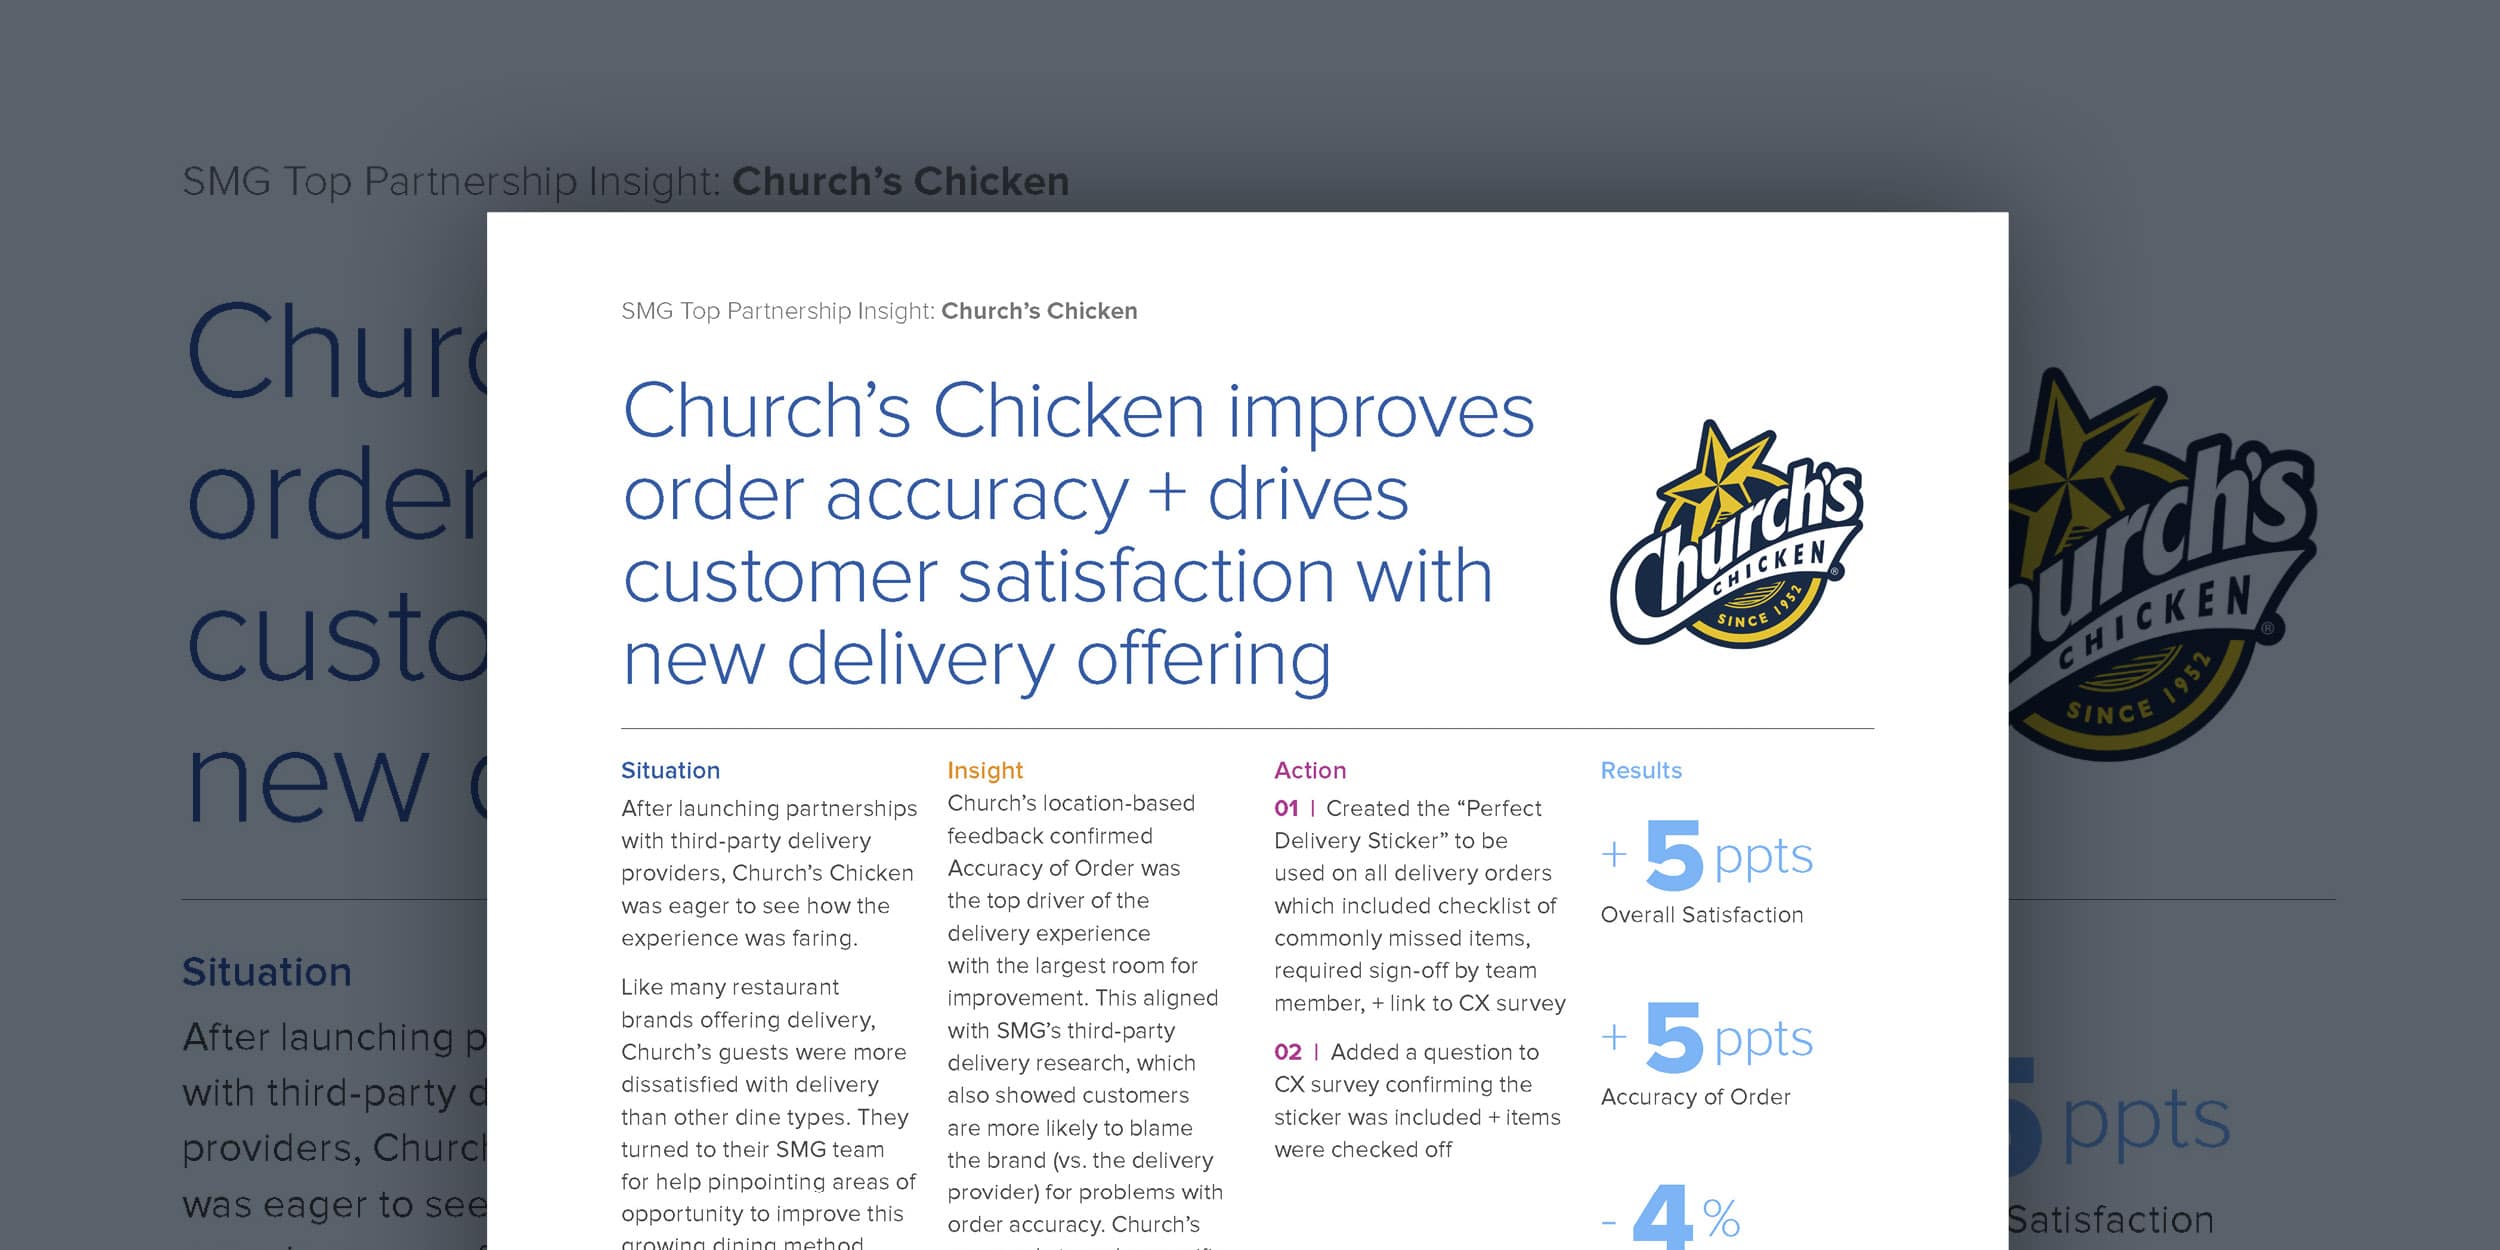 Church’s Chicken improves order accuracy + drives customer satisfaction with new delivery offering